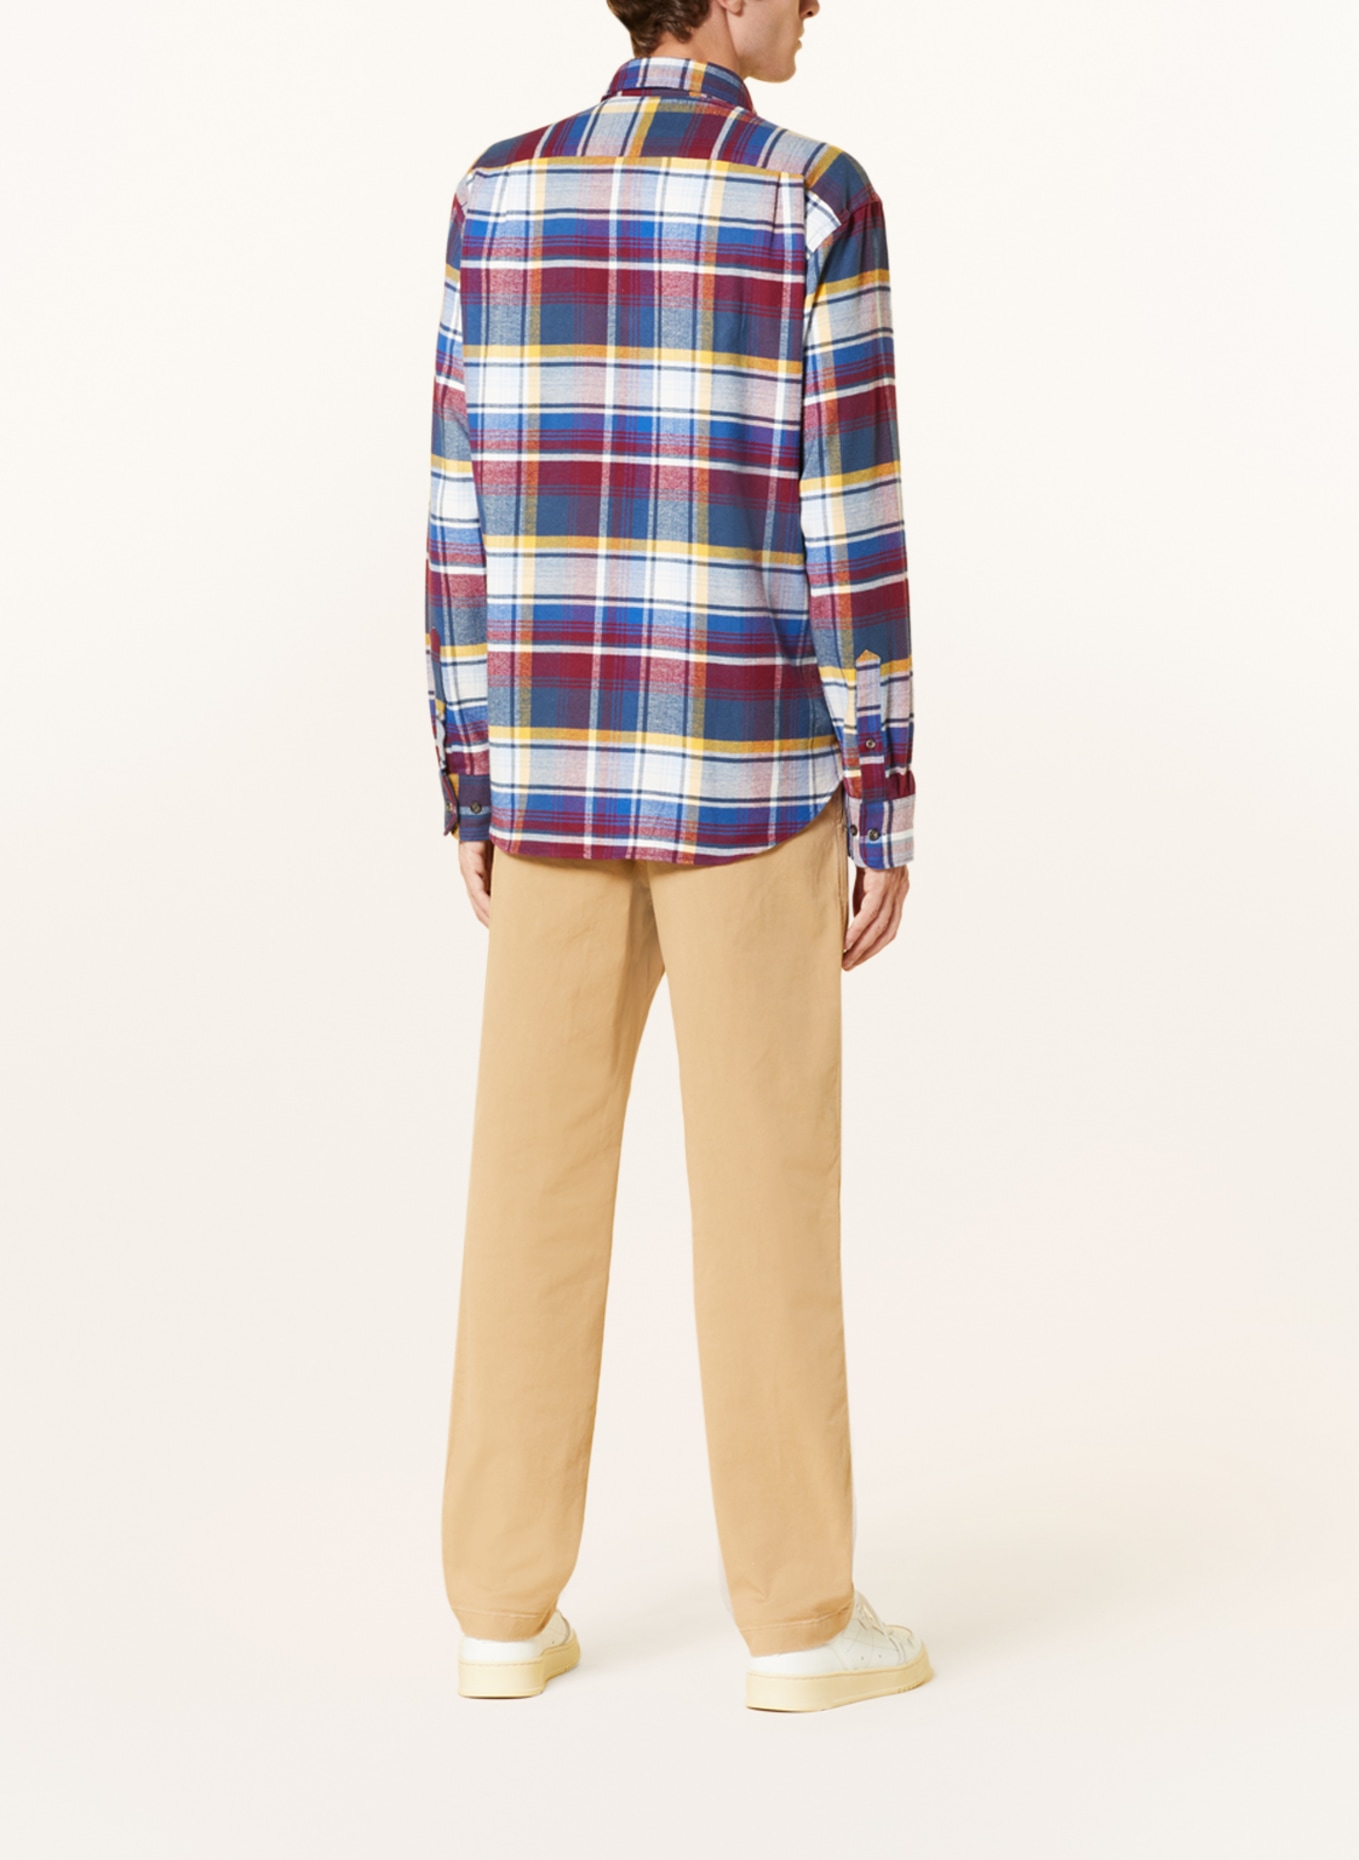 STROKESMAN'S Flannel shirt regular fit, Color: YELLOW/ DARK RED/ BLUE (Image 3)